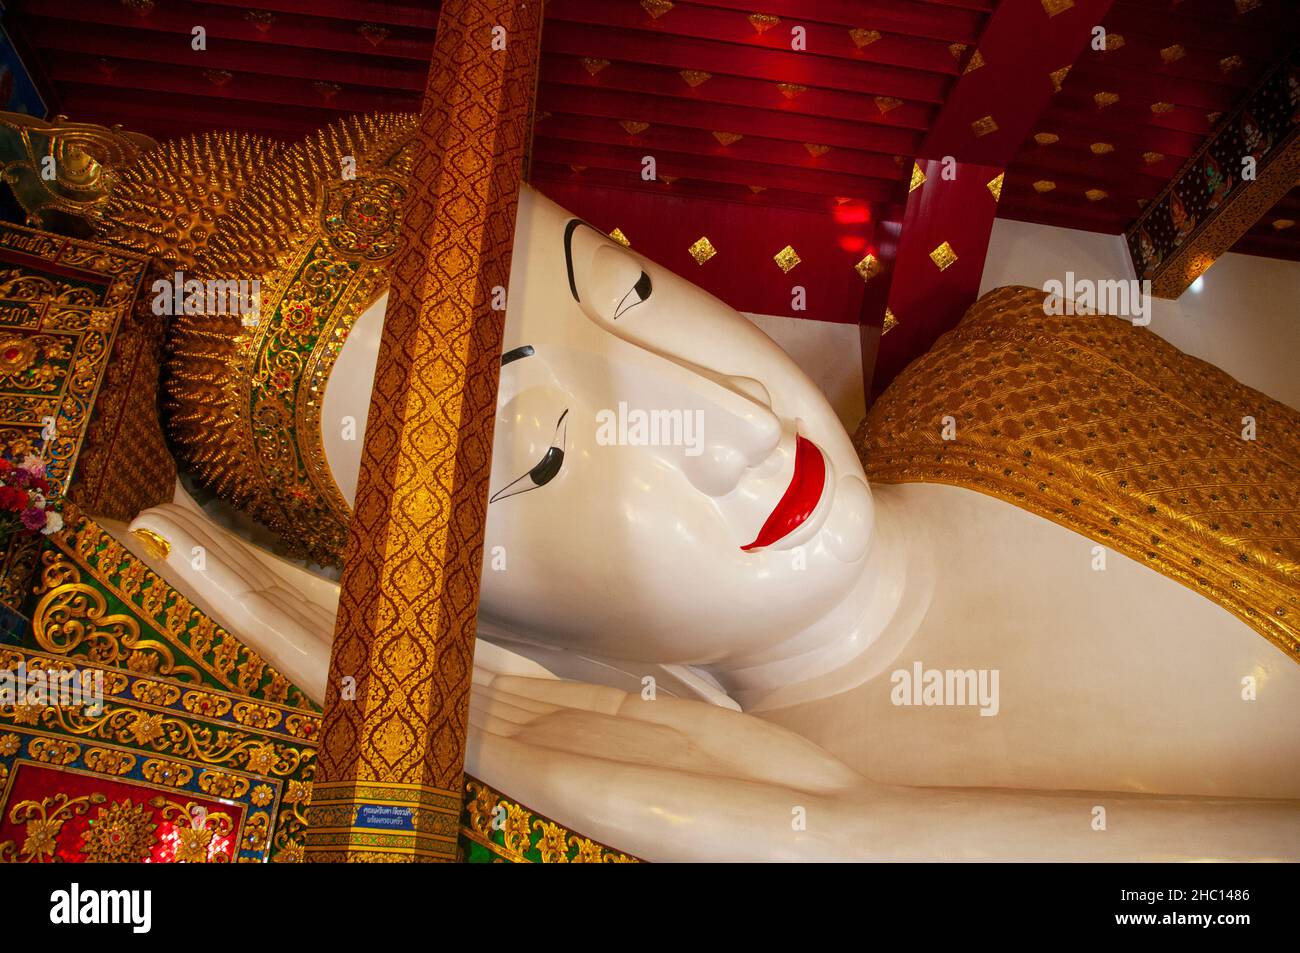 Thailand: Reclining Buddha, Wat Ban Den, Ban Inthakin, Mae Taeng District, Chiang Mai. Wat Ban Den, also known as Wat Bandensali Si Mueang Kaen, is a large Buddhist temple complex north of the city of Chiang Mai in Northern Thailand. Stock Photo